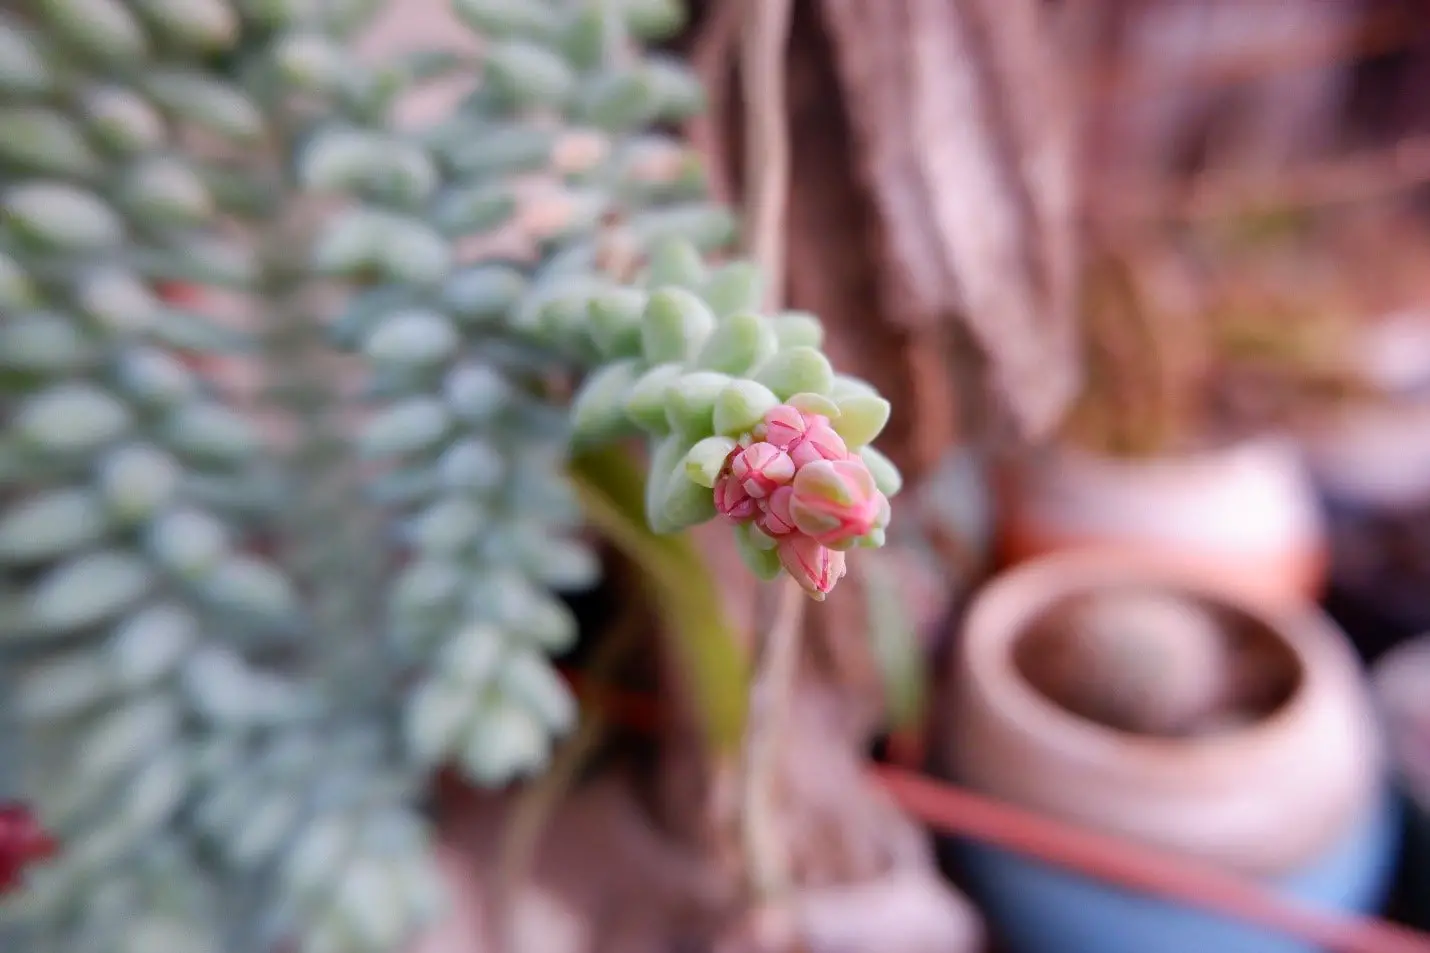 Succulent’s Leaves are Curling Down - Know the Reasons Here